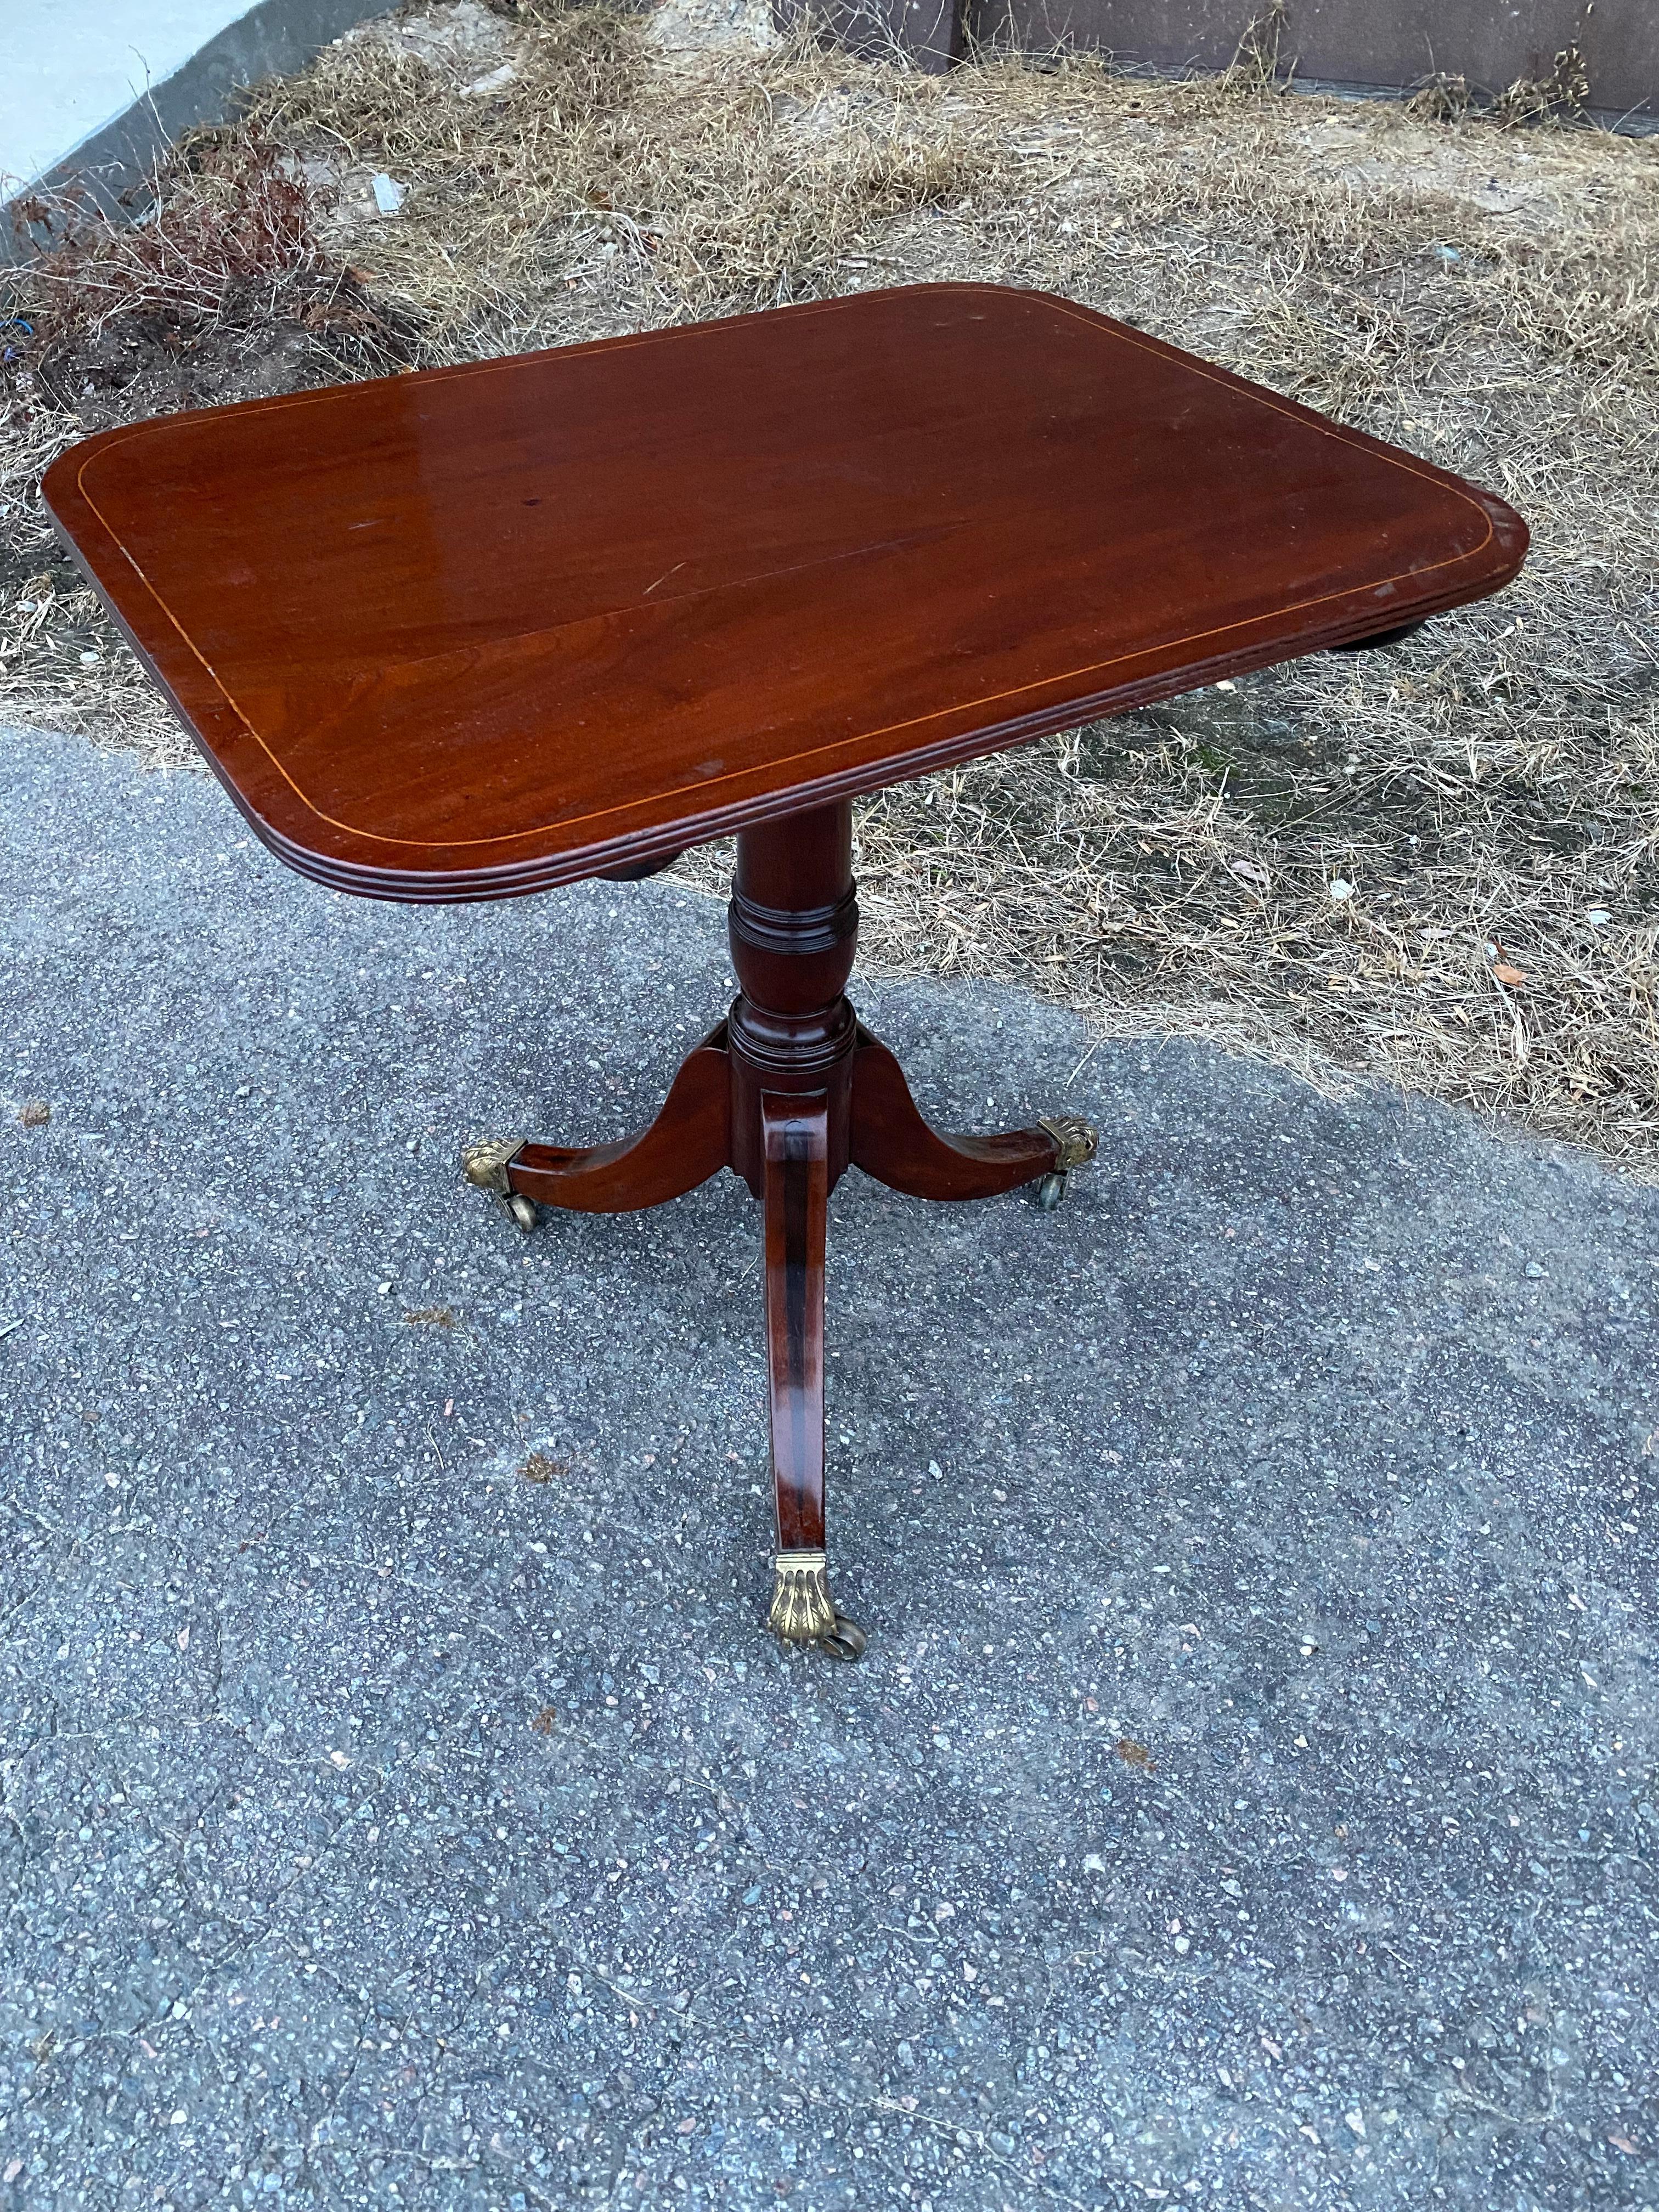 Great little 19th century English Regency tilt top mahogany side table with string inlaid top, ebony inlaid legs and paw foot castors.